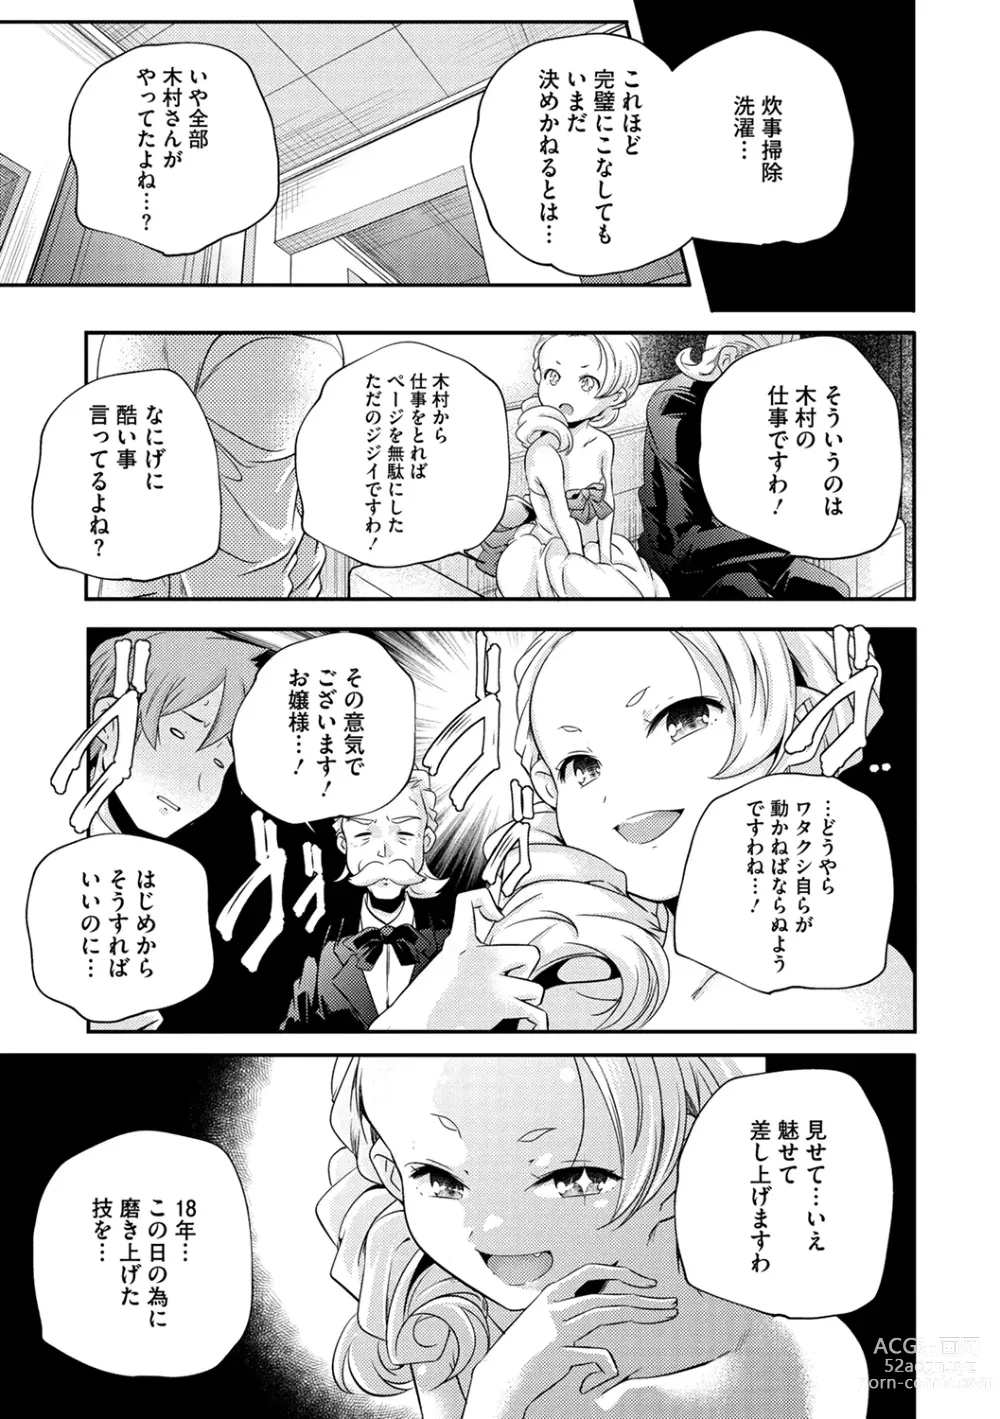 Page 27 of manga LQ -Little Queen- Vol. 52